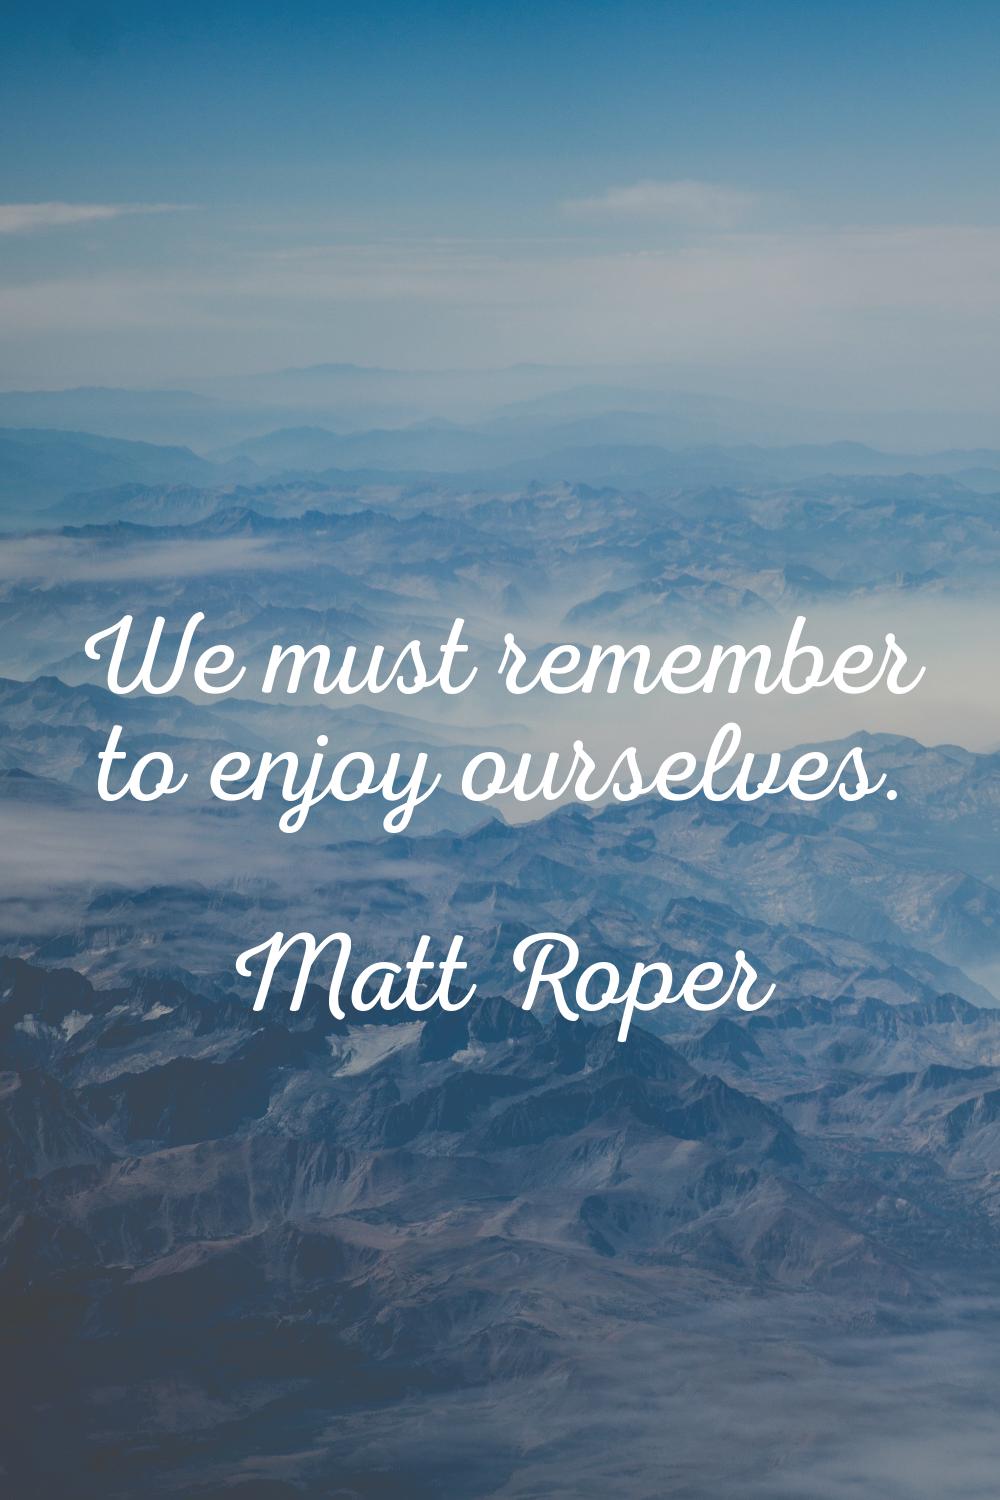 We must remember to enjoy ourselves.